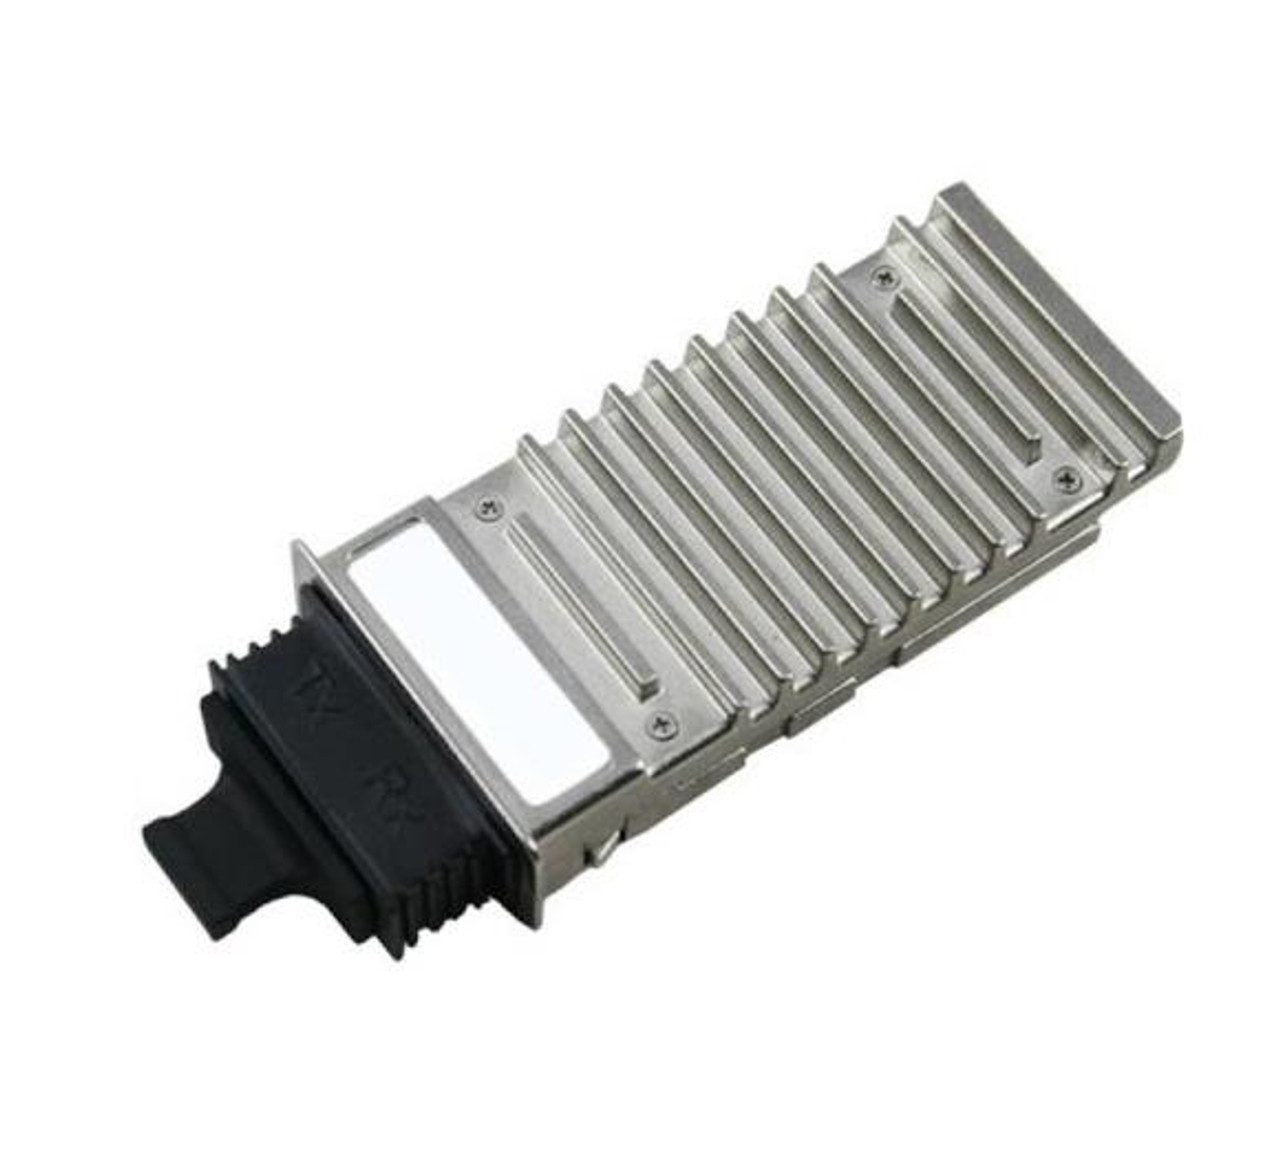 J8438A-ACCT Accortec 10Gbps 10GBase-ER Single-mode Fiber 40km 1550nm Duplex SC Connector X2 Transceiver Module for HP Compatible